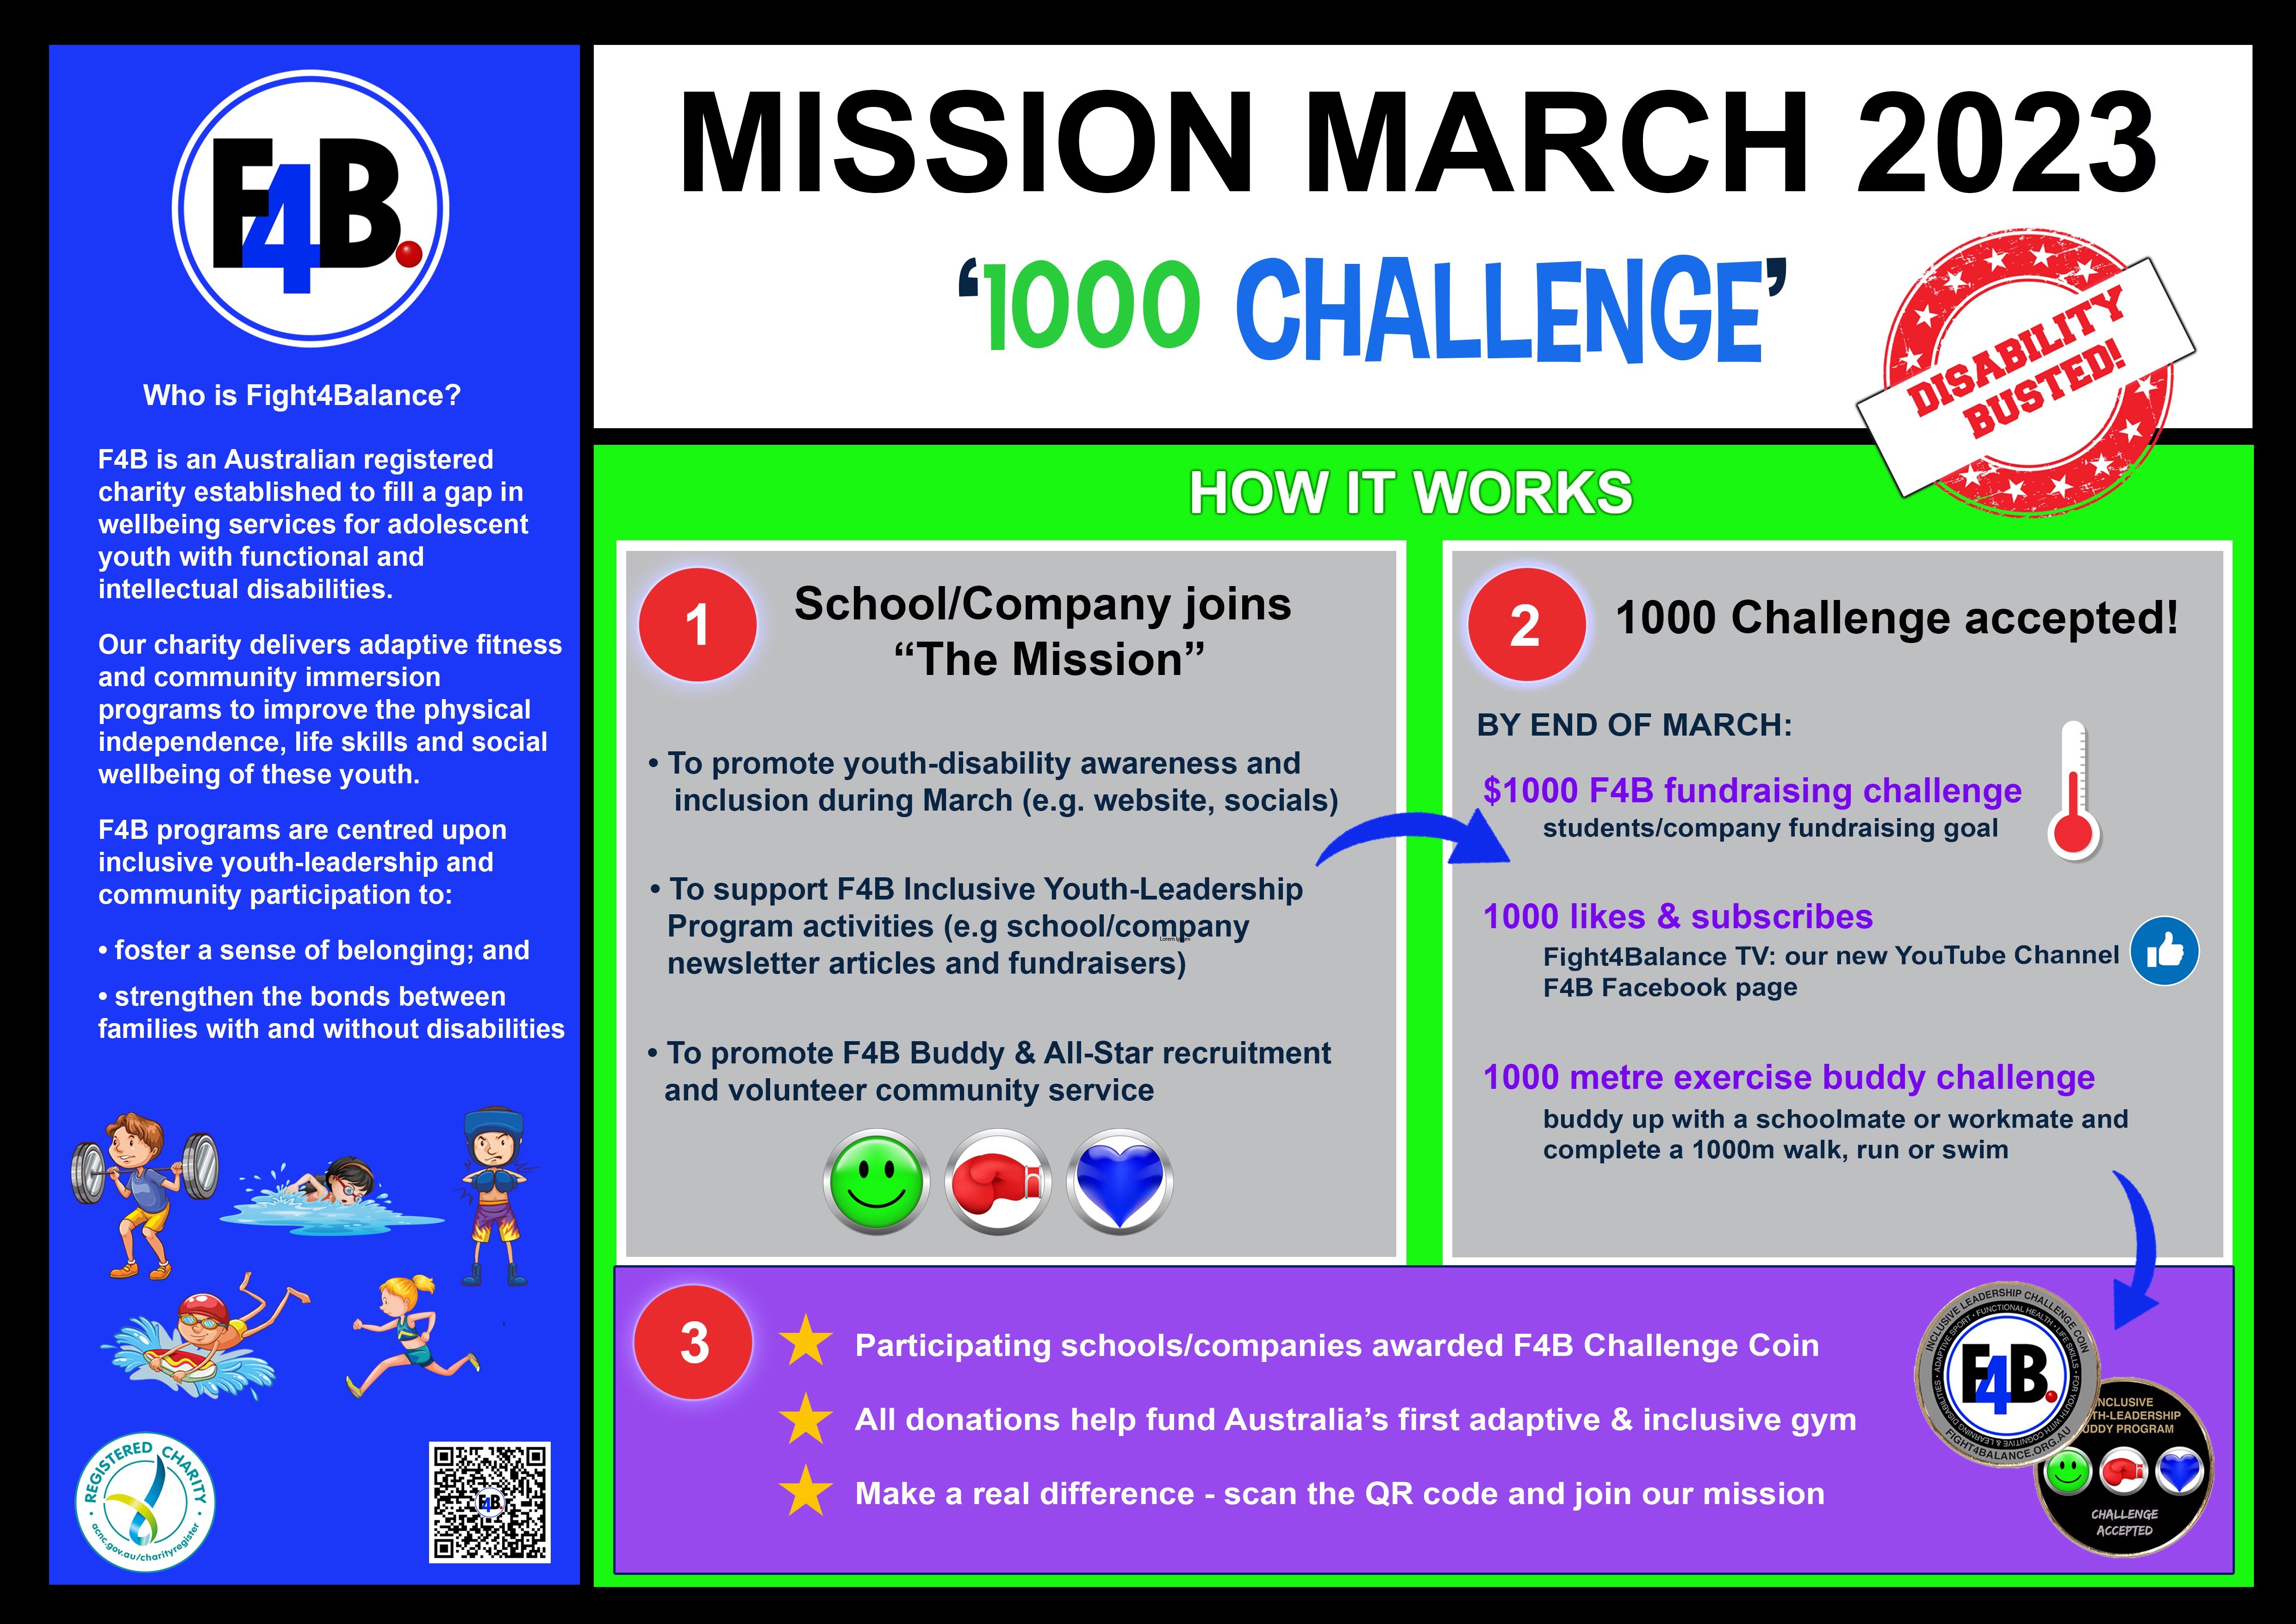 MISSION MARCH 2023